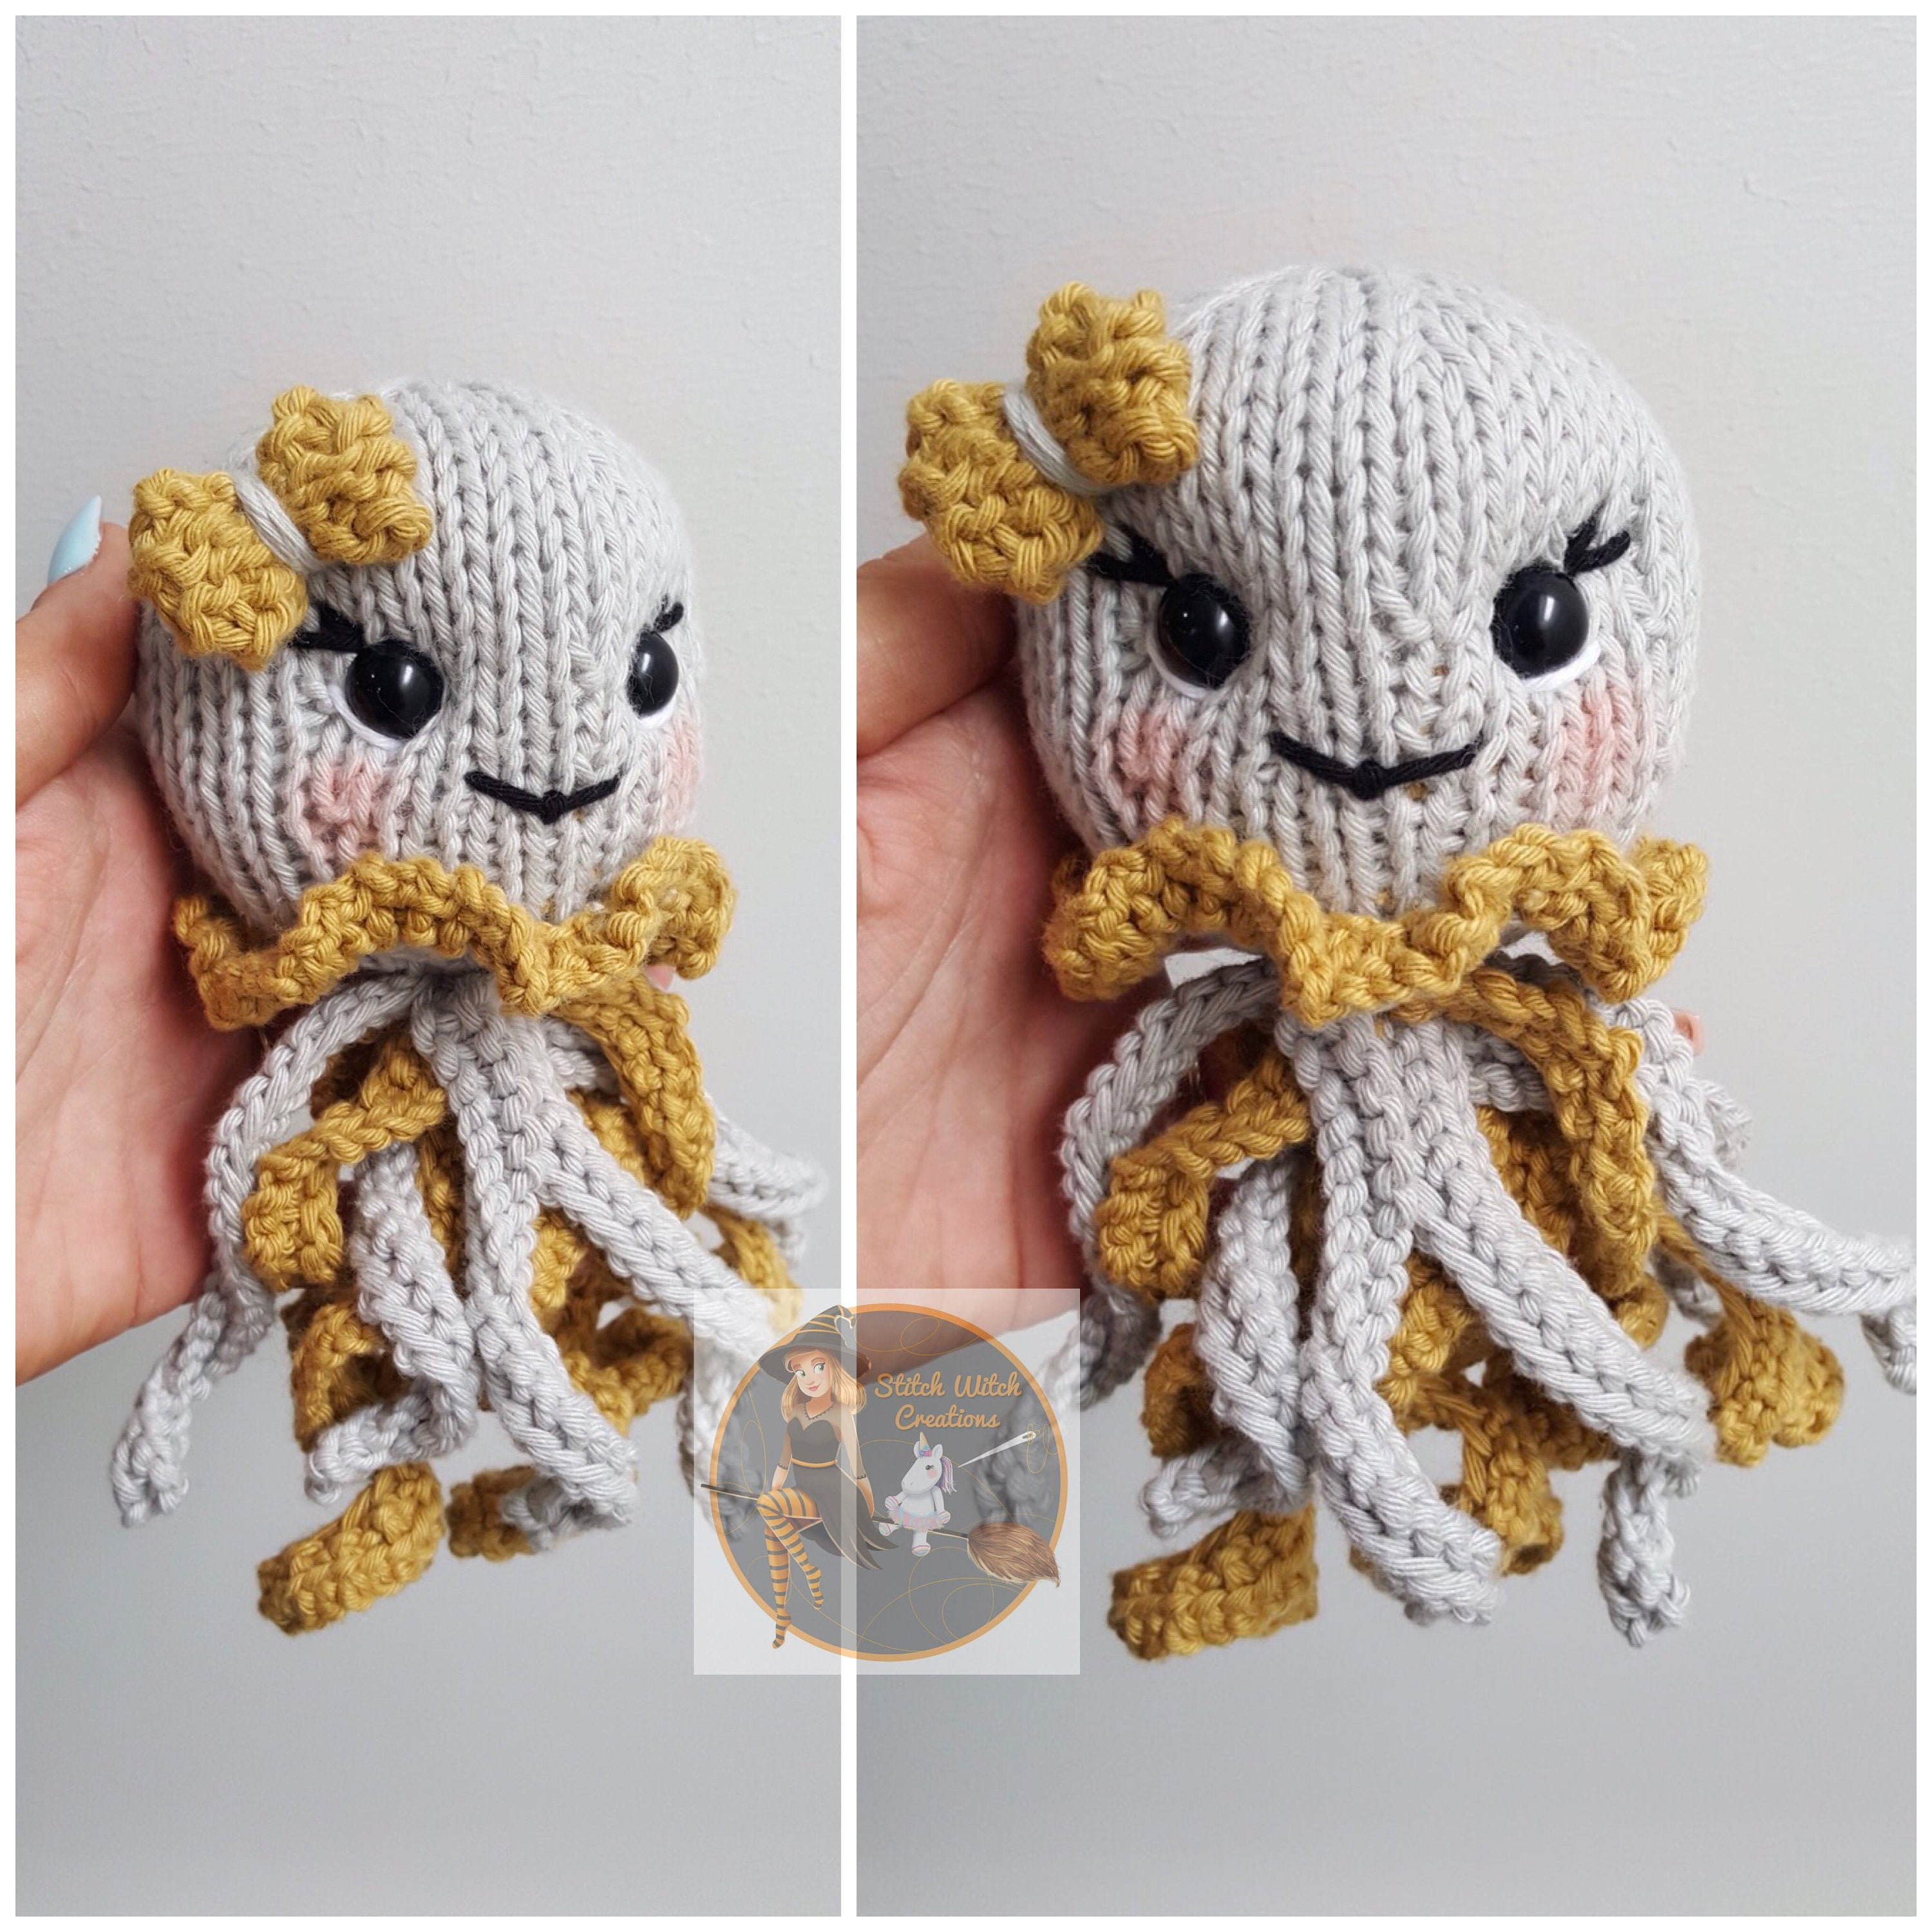 Octopus Knitting Pattern Swc Small Jellyfishoctopus Knitting Pattern Pdf Knitting Pattern Instant Download Pattern Only